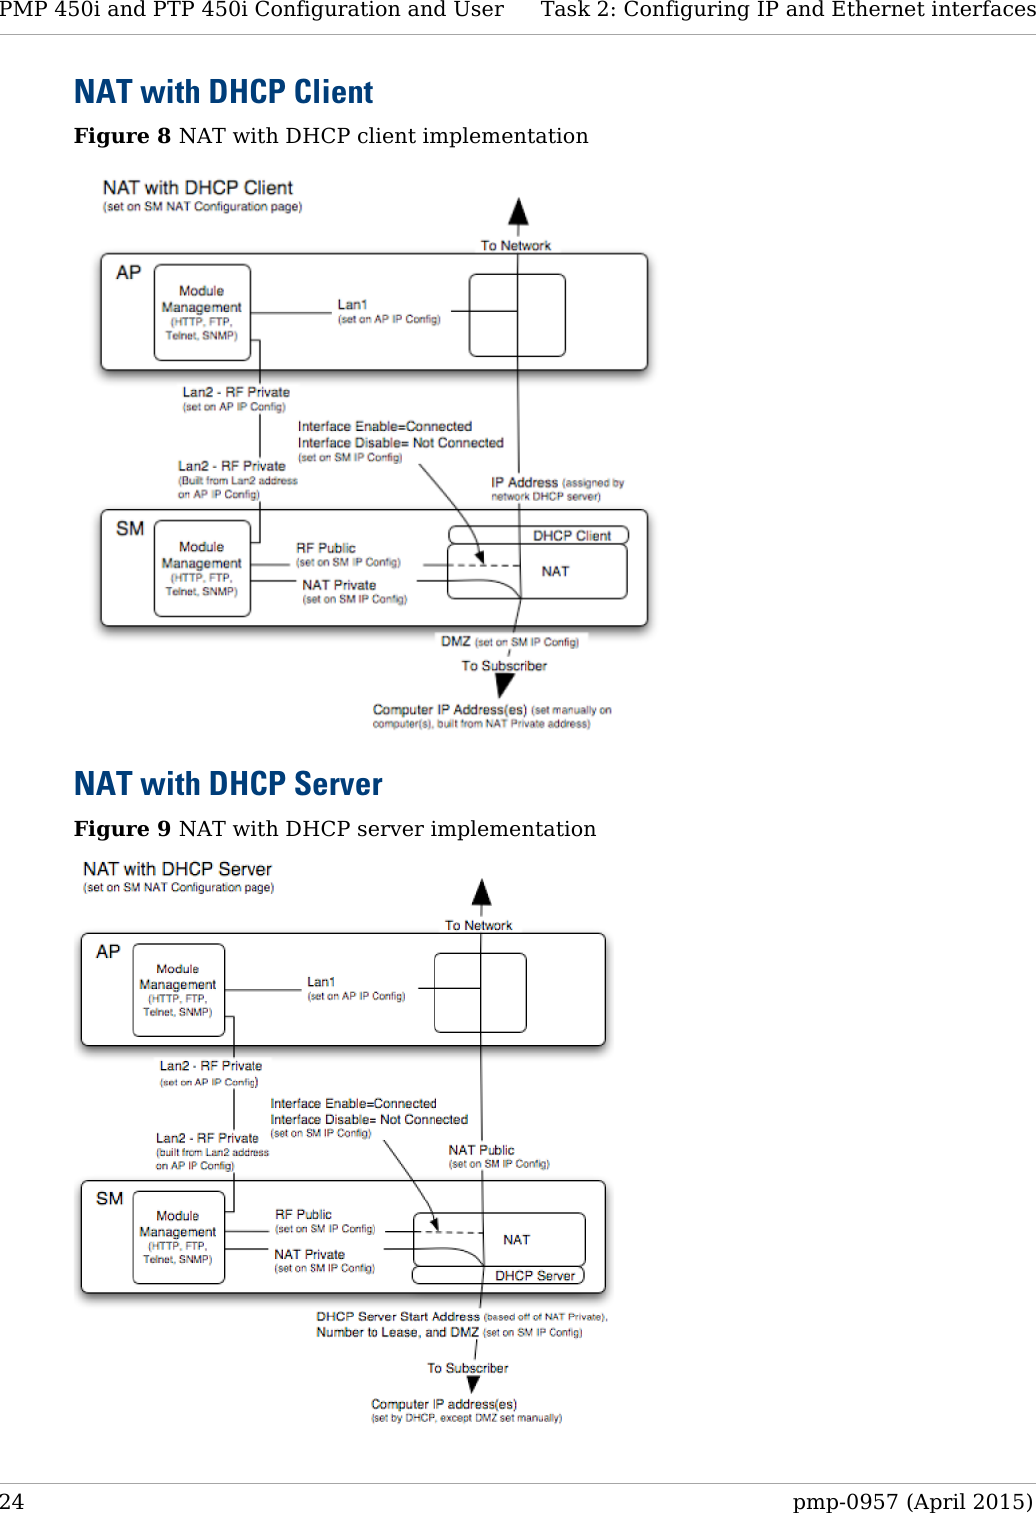 PMP 450i and PTP 450i Configuration and User   Task 2: Configuring IP and Ethernet interfaces  NAT with DHCP Client Figure 8 NAT with DHCP client implementation  NAT with DHCP Server Figure 9 NAT with DHCP server implementation  24  pmp-0957 (April 2015)  